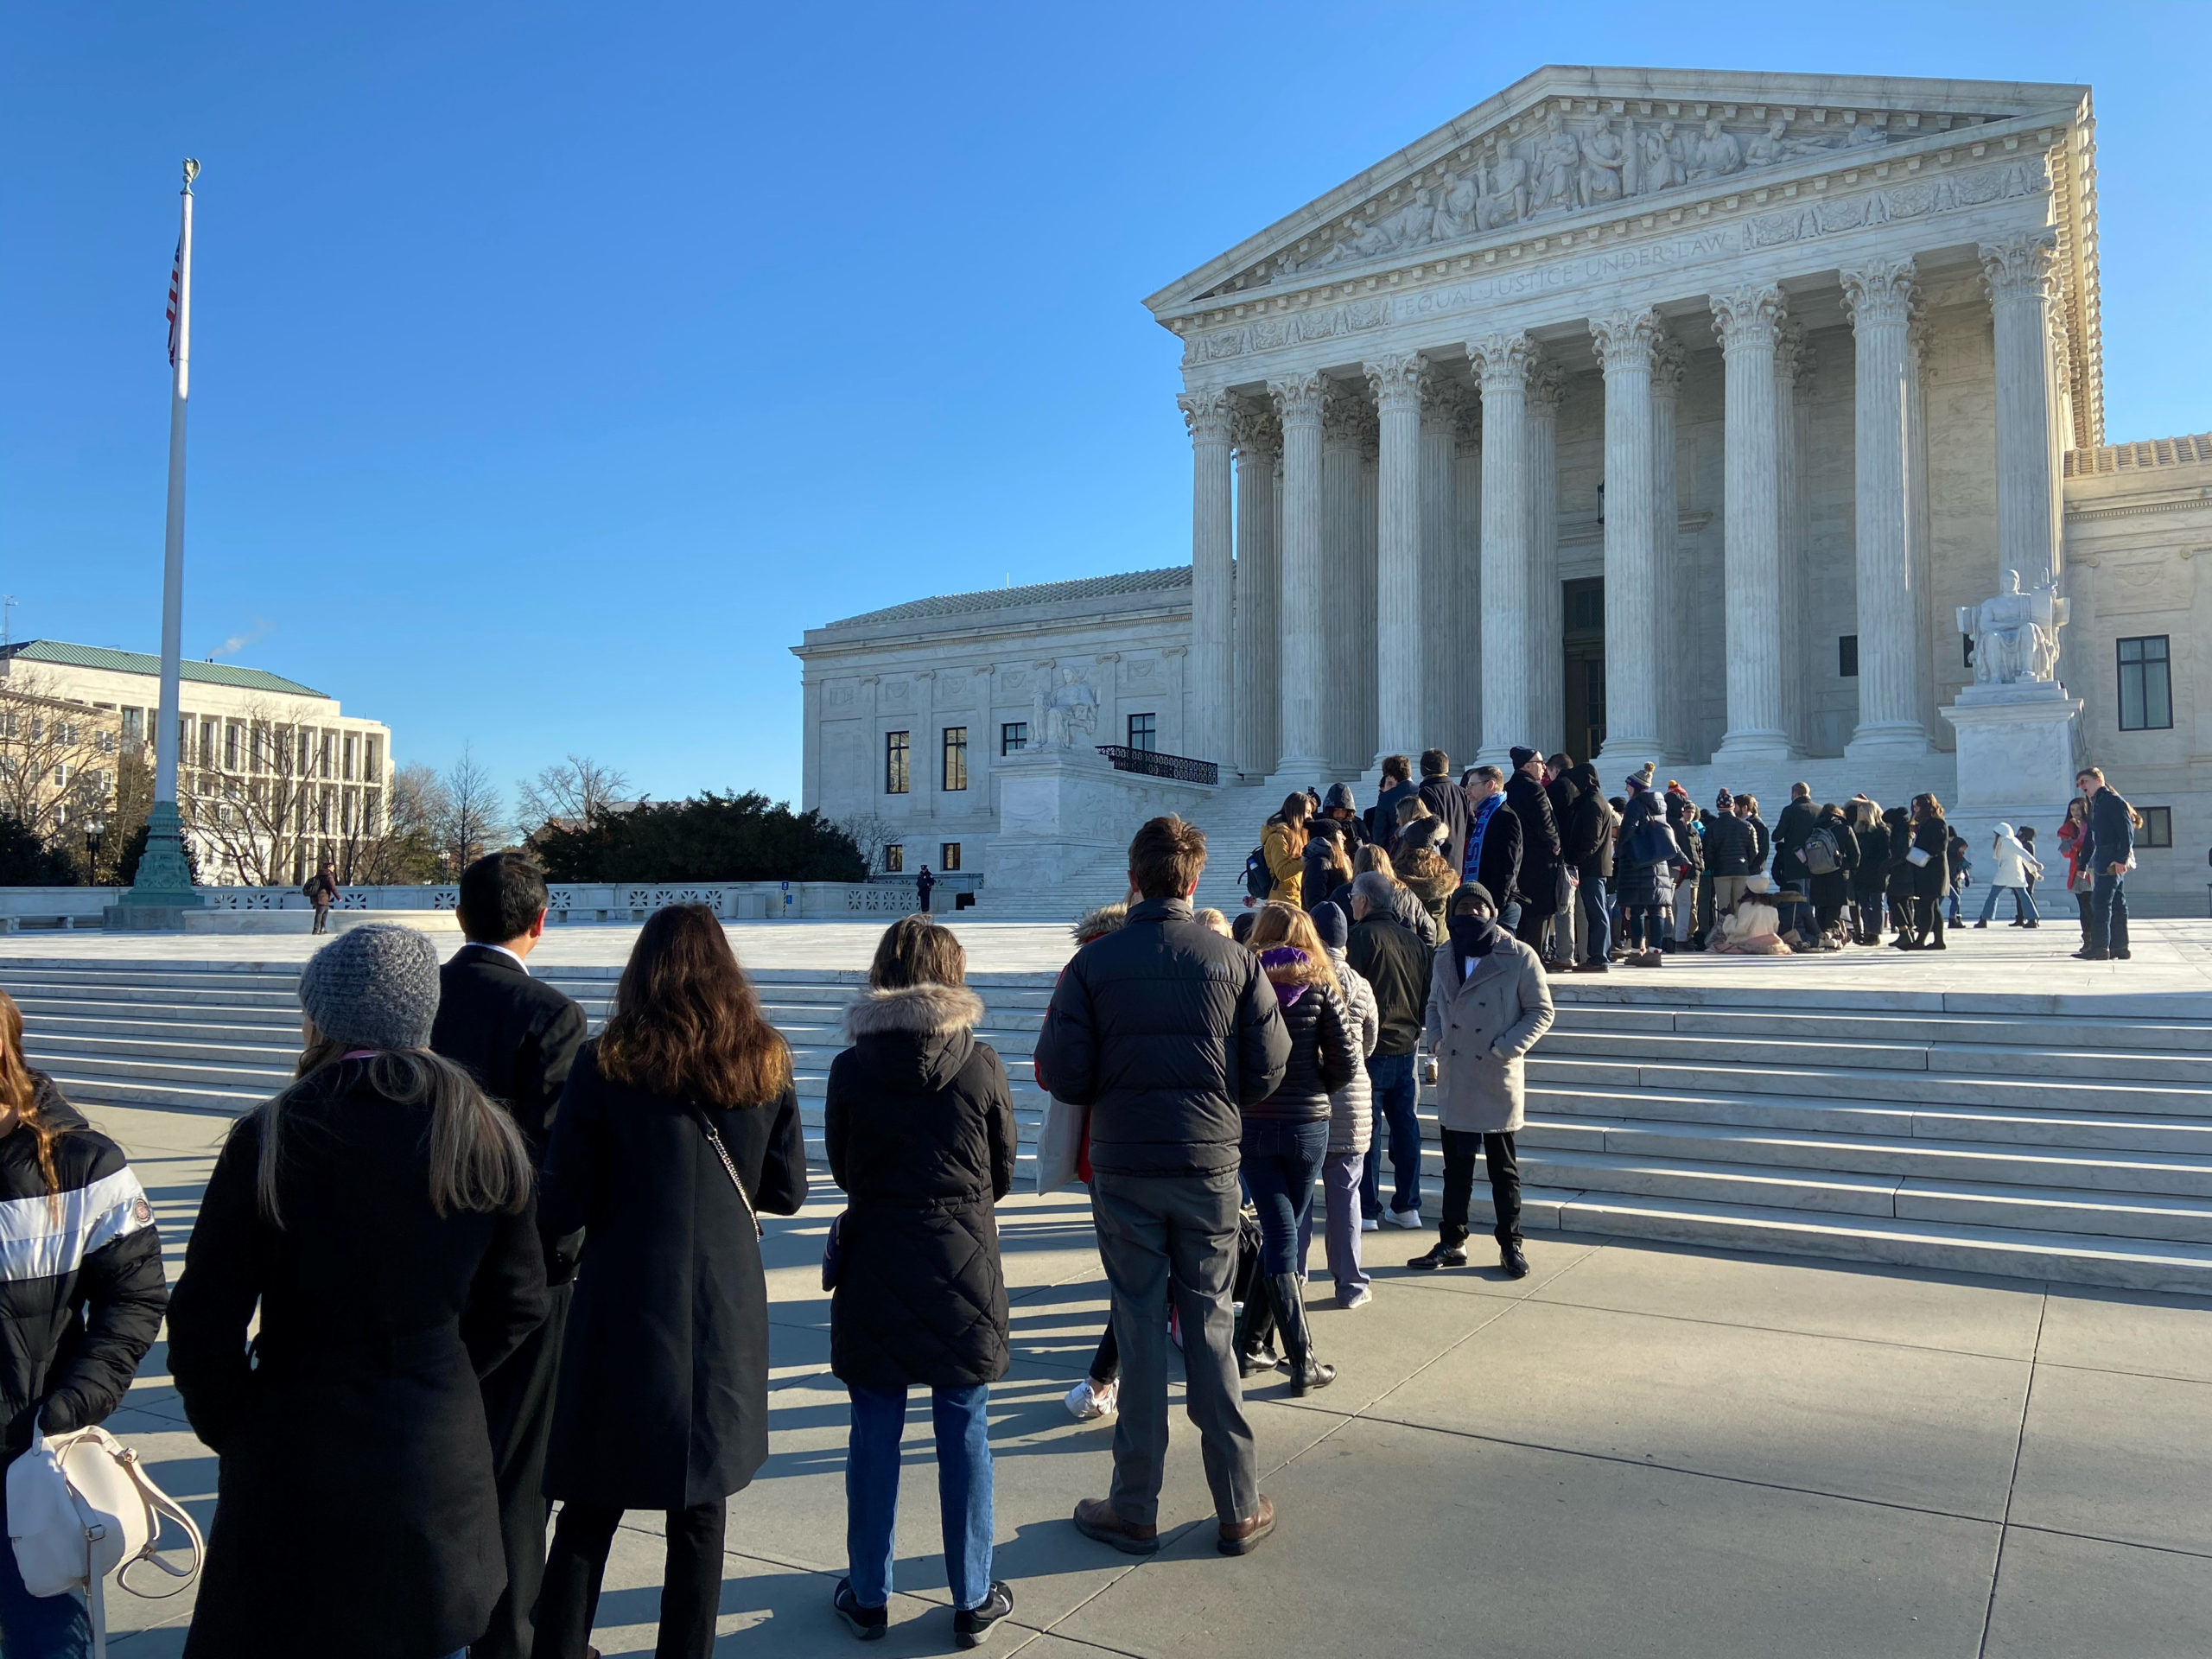 People line up outside the Supreme Court ahead of oral arguments in a case from Montana on religious rights and school choice, in Washington, U.S. January 22, 2020. REUTERS/Lawrence Hurley